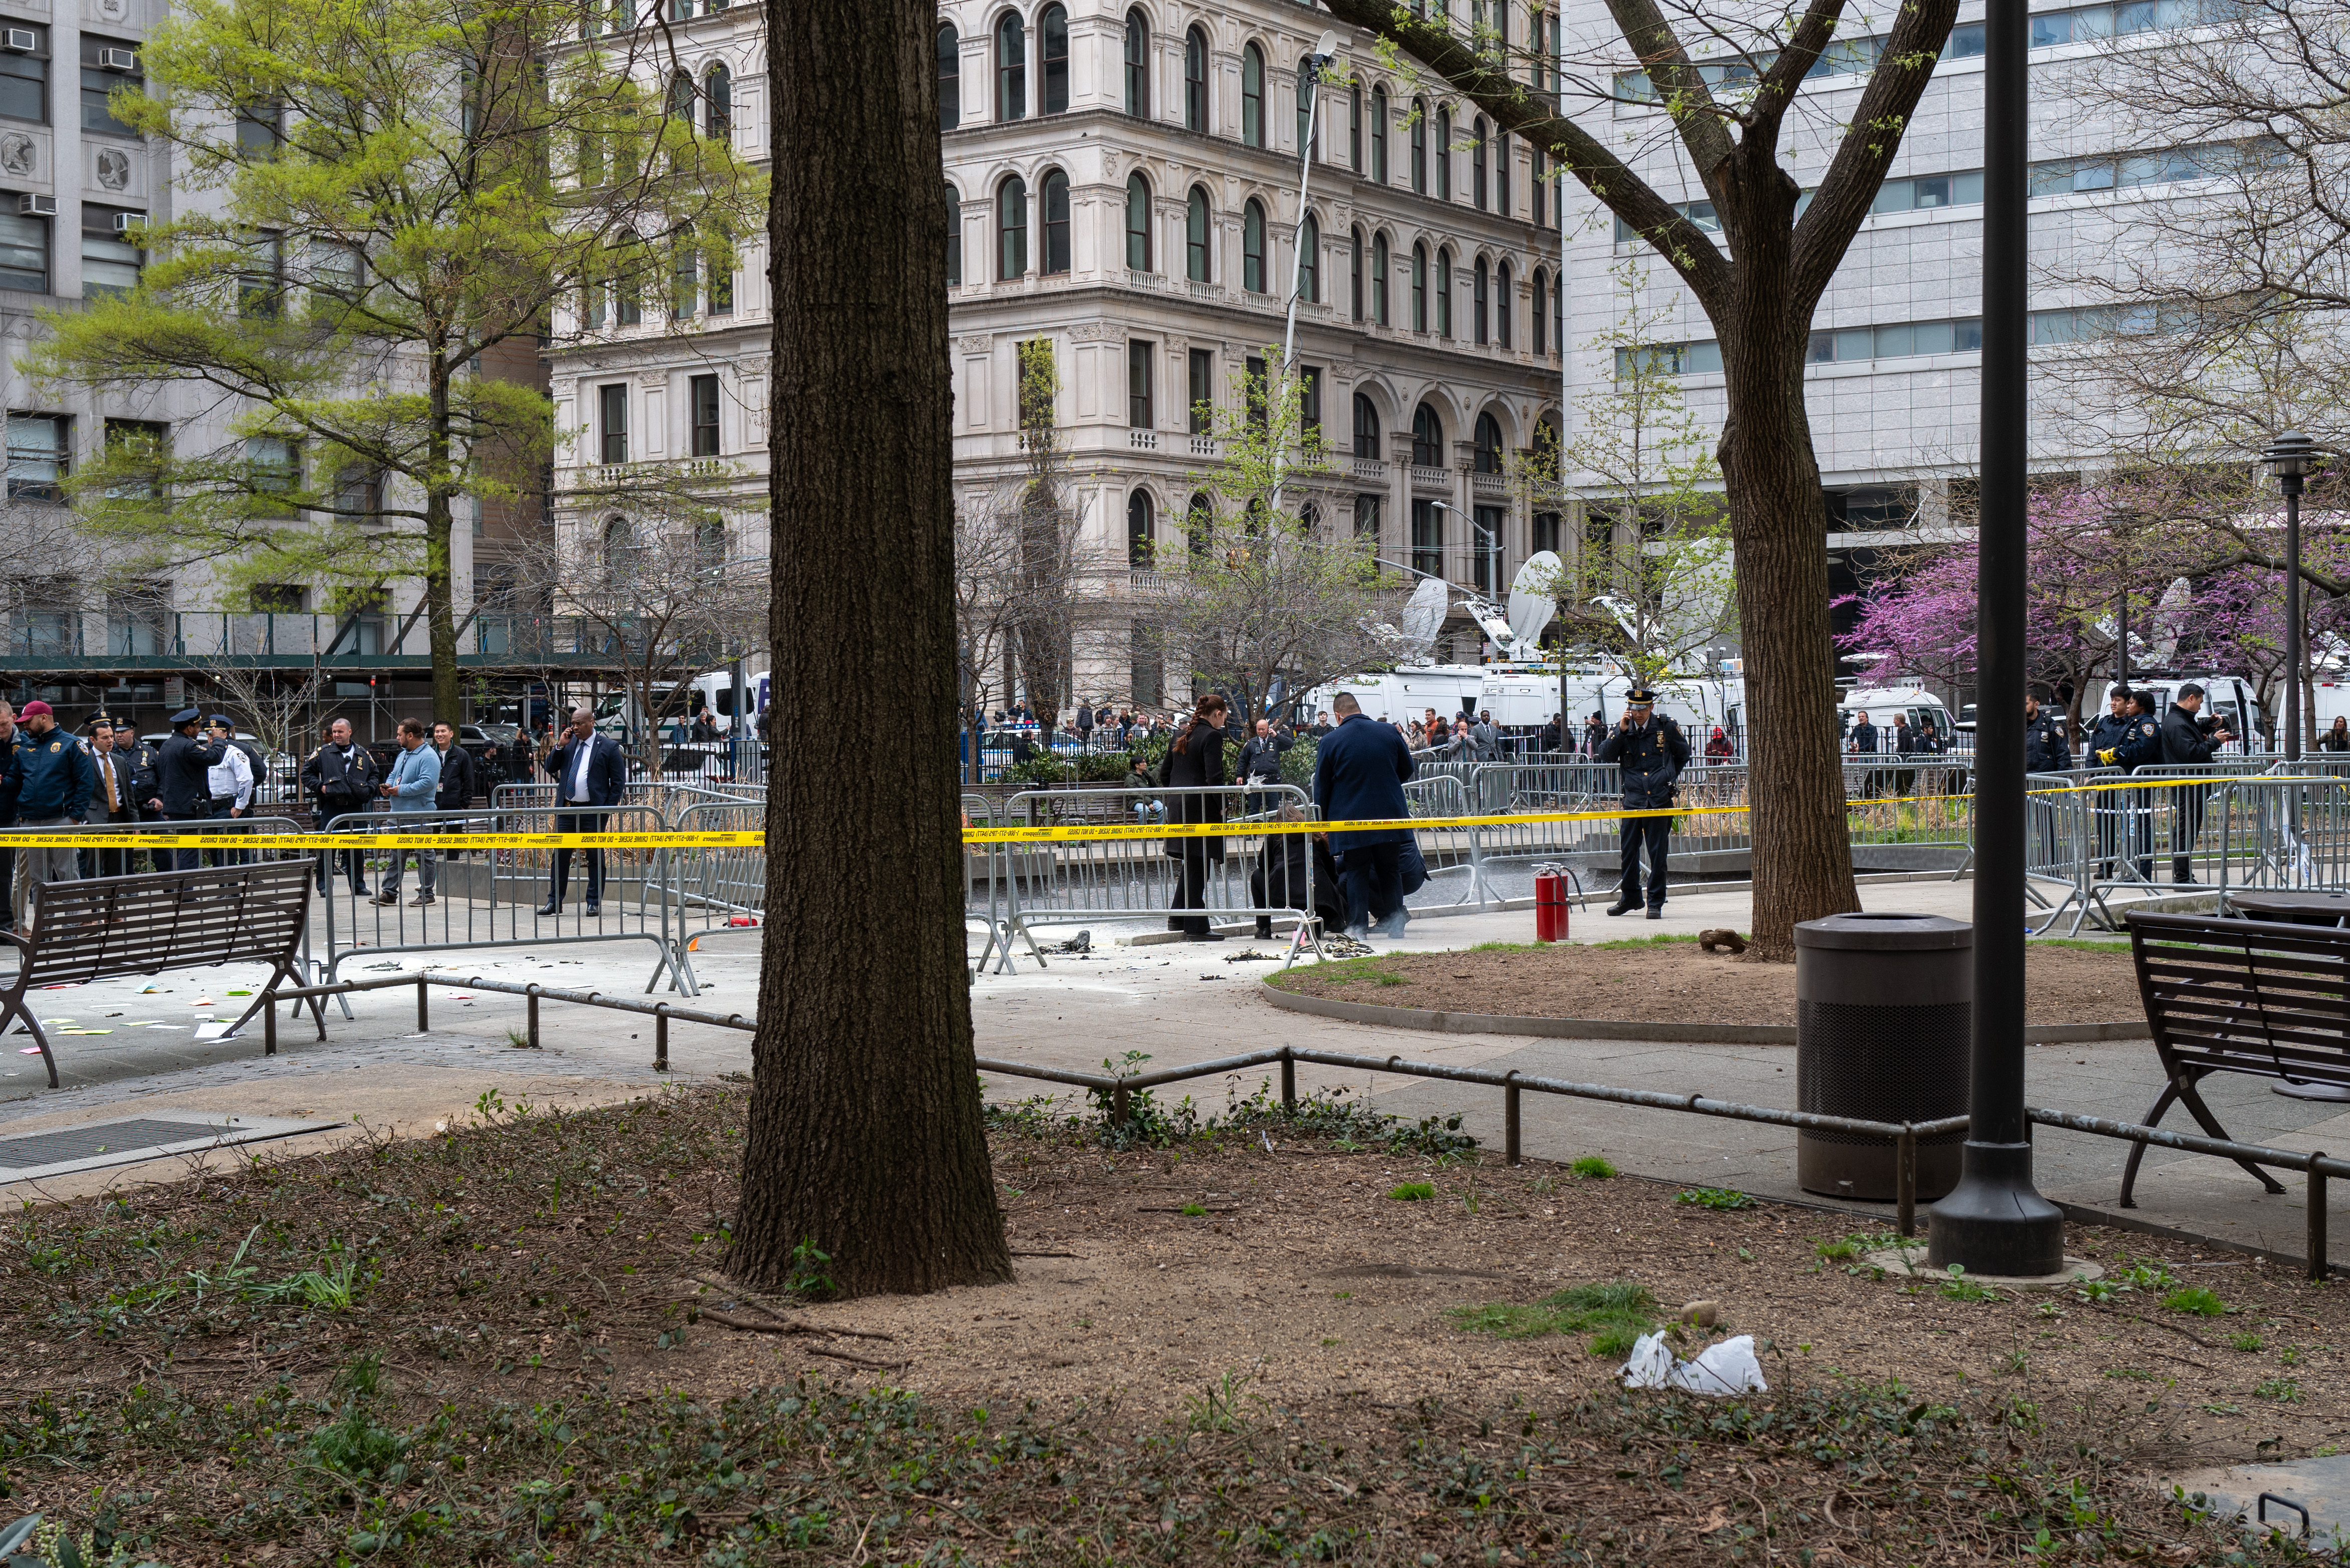 Police and emergency officials gather in a park near the Manhattan Criminal Courthouse in New York, where a man lit himself on fire, on April 19.